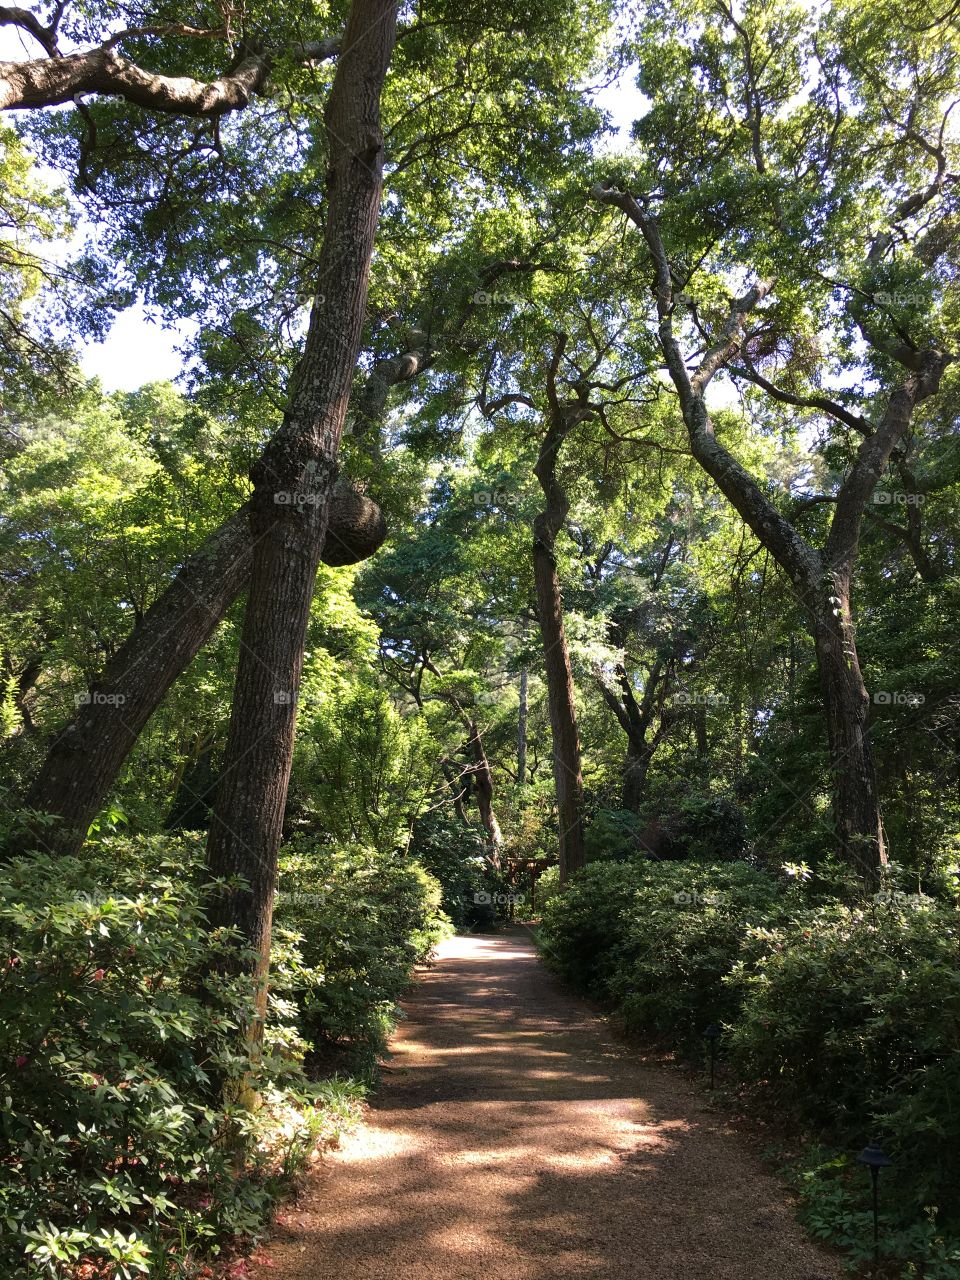 Take a walk into nature on a beautiful tree lined foot path